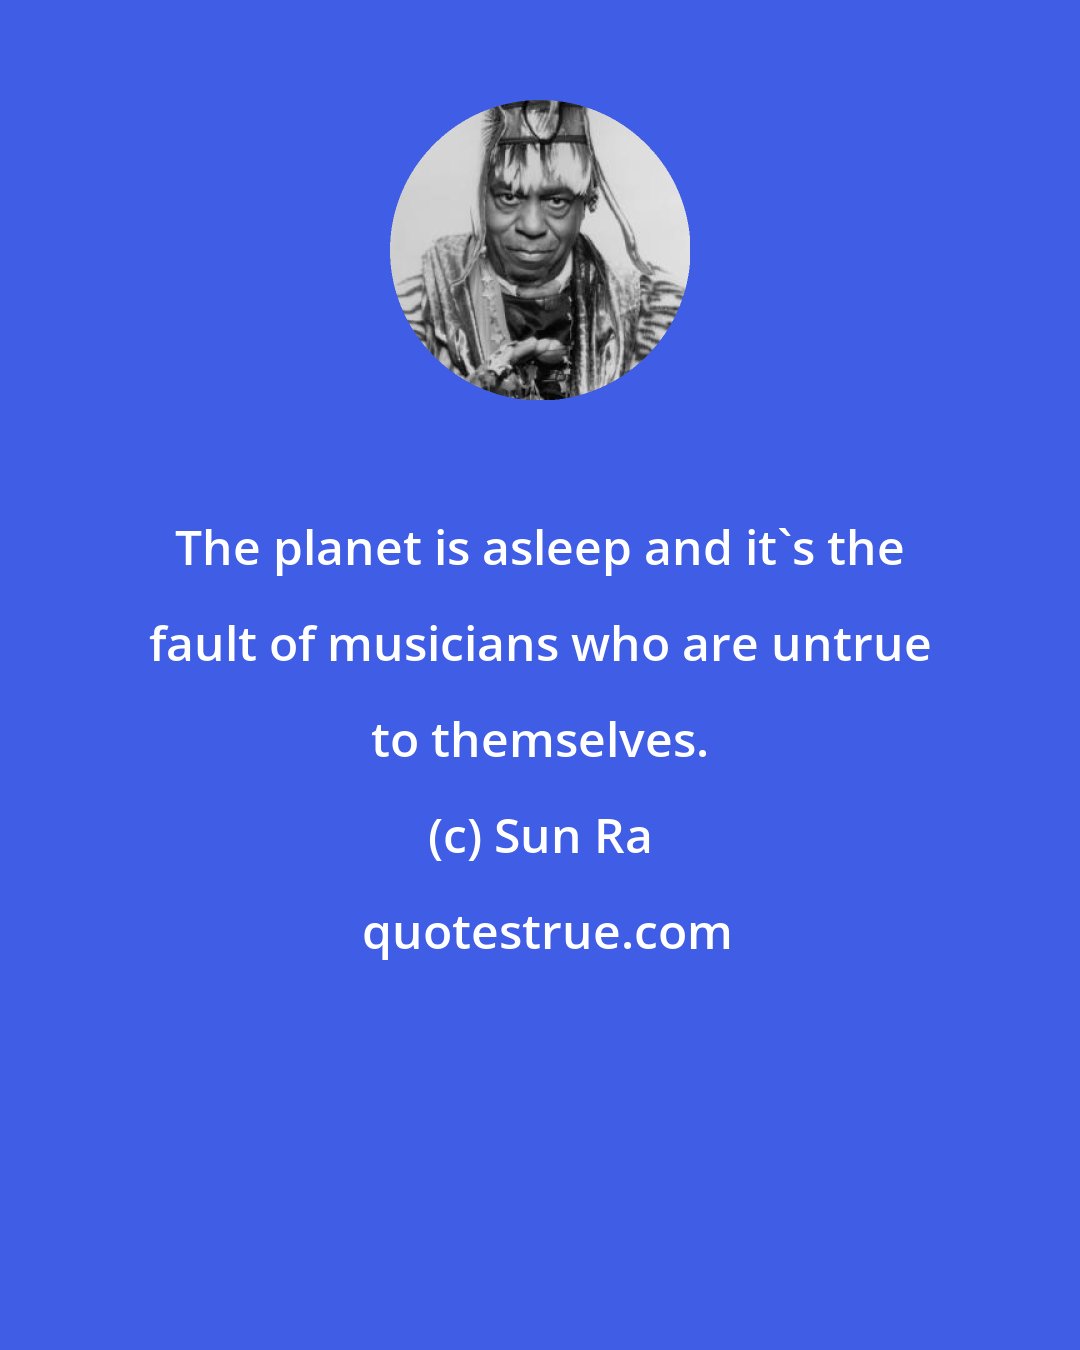 Sun Ra: The planet is asleep and it's the fault of musicians who are untrue to themselves.